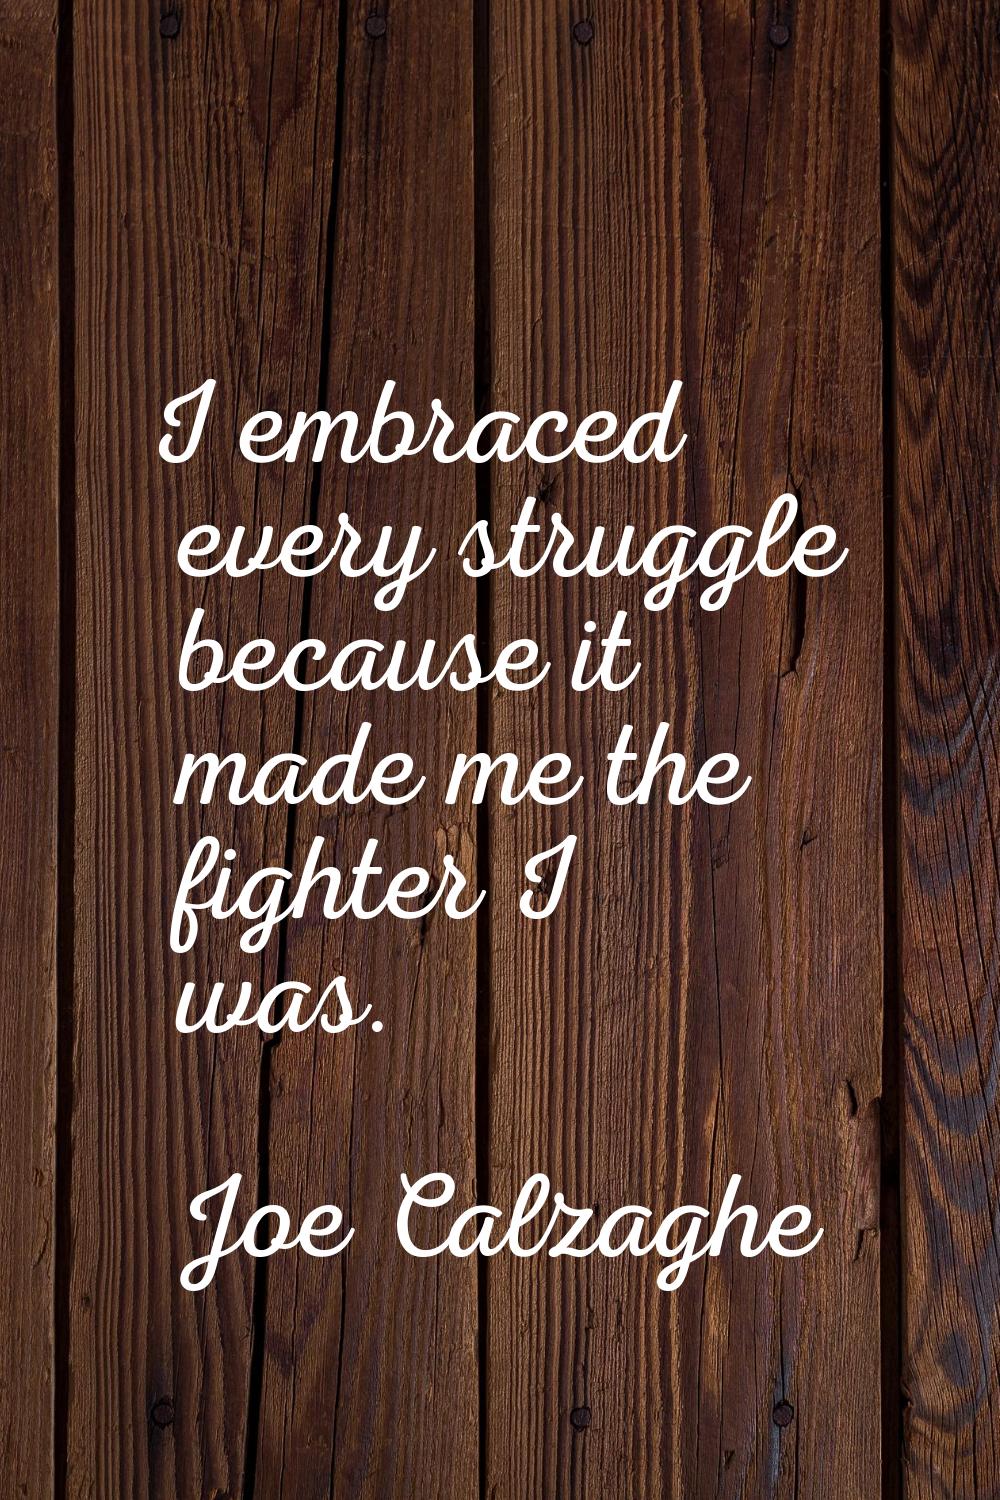 I embraced every struggle because it made me the fighter I was.